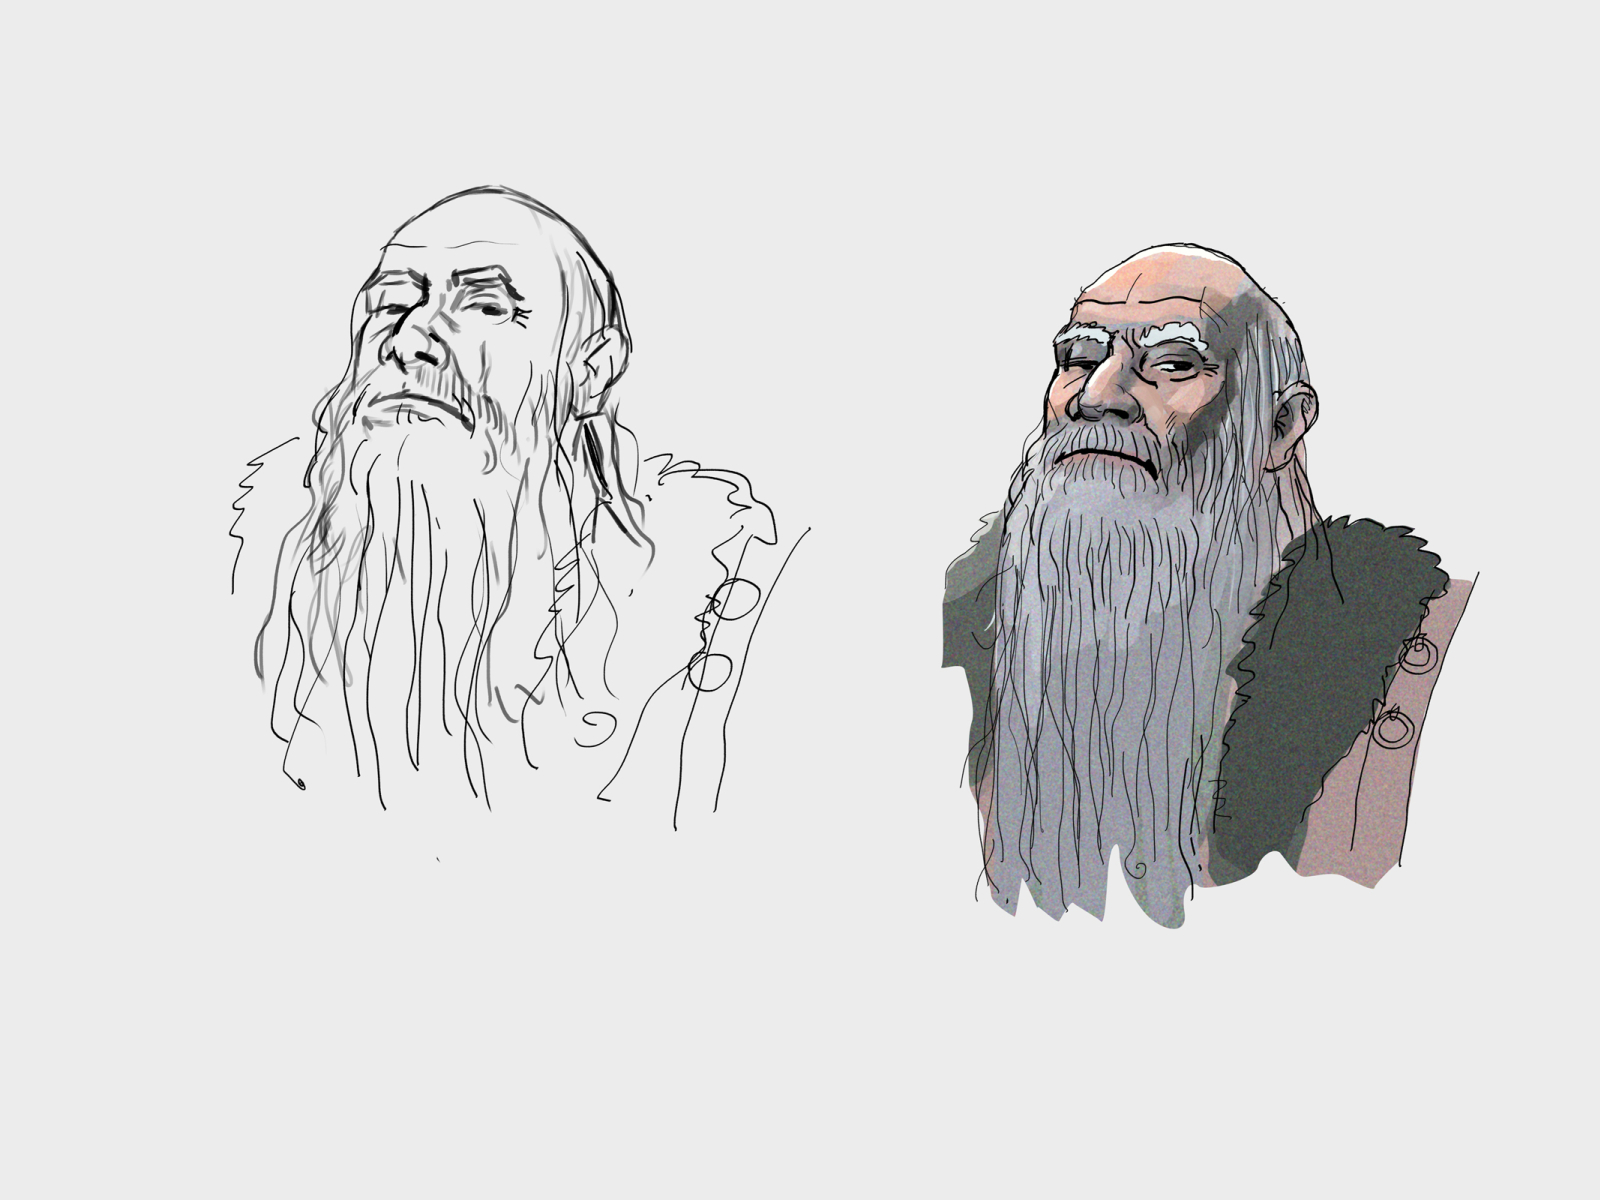 concept art - characters by Adam Szary on Dribbble